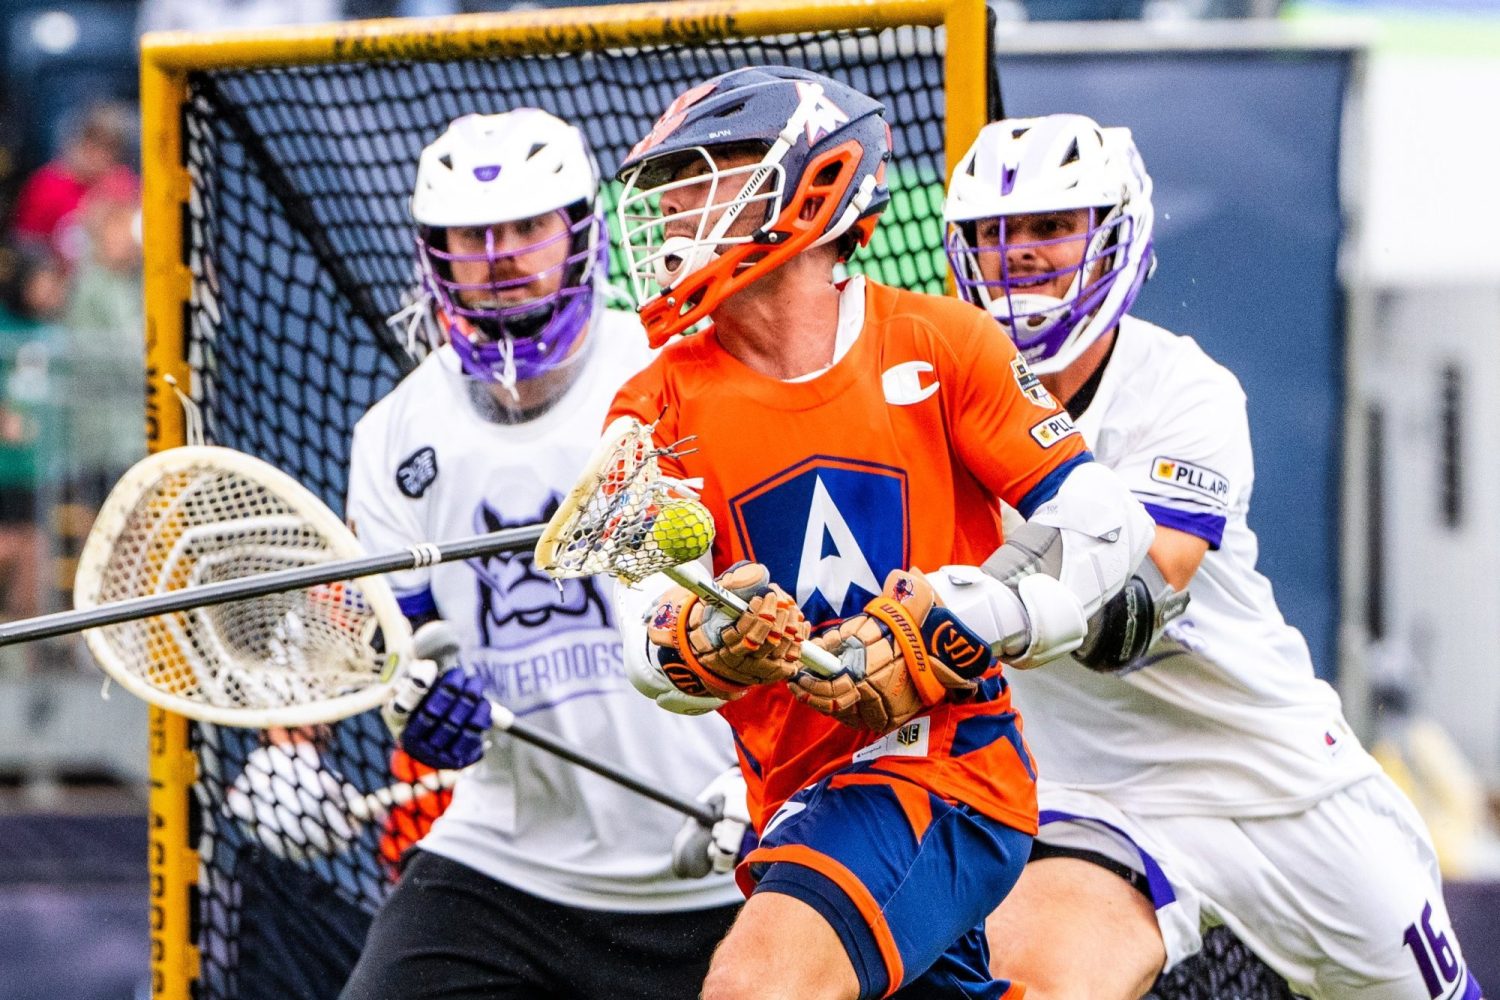 Archers attackman Grant Ament drives to the goal in Premier Lacrosse League Championship against Waterdogs.